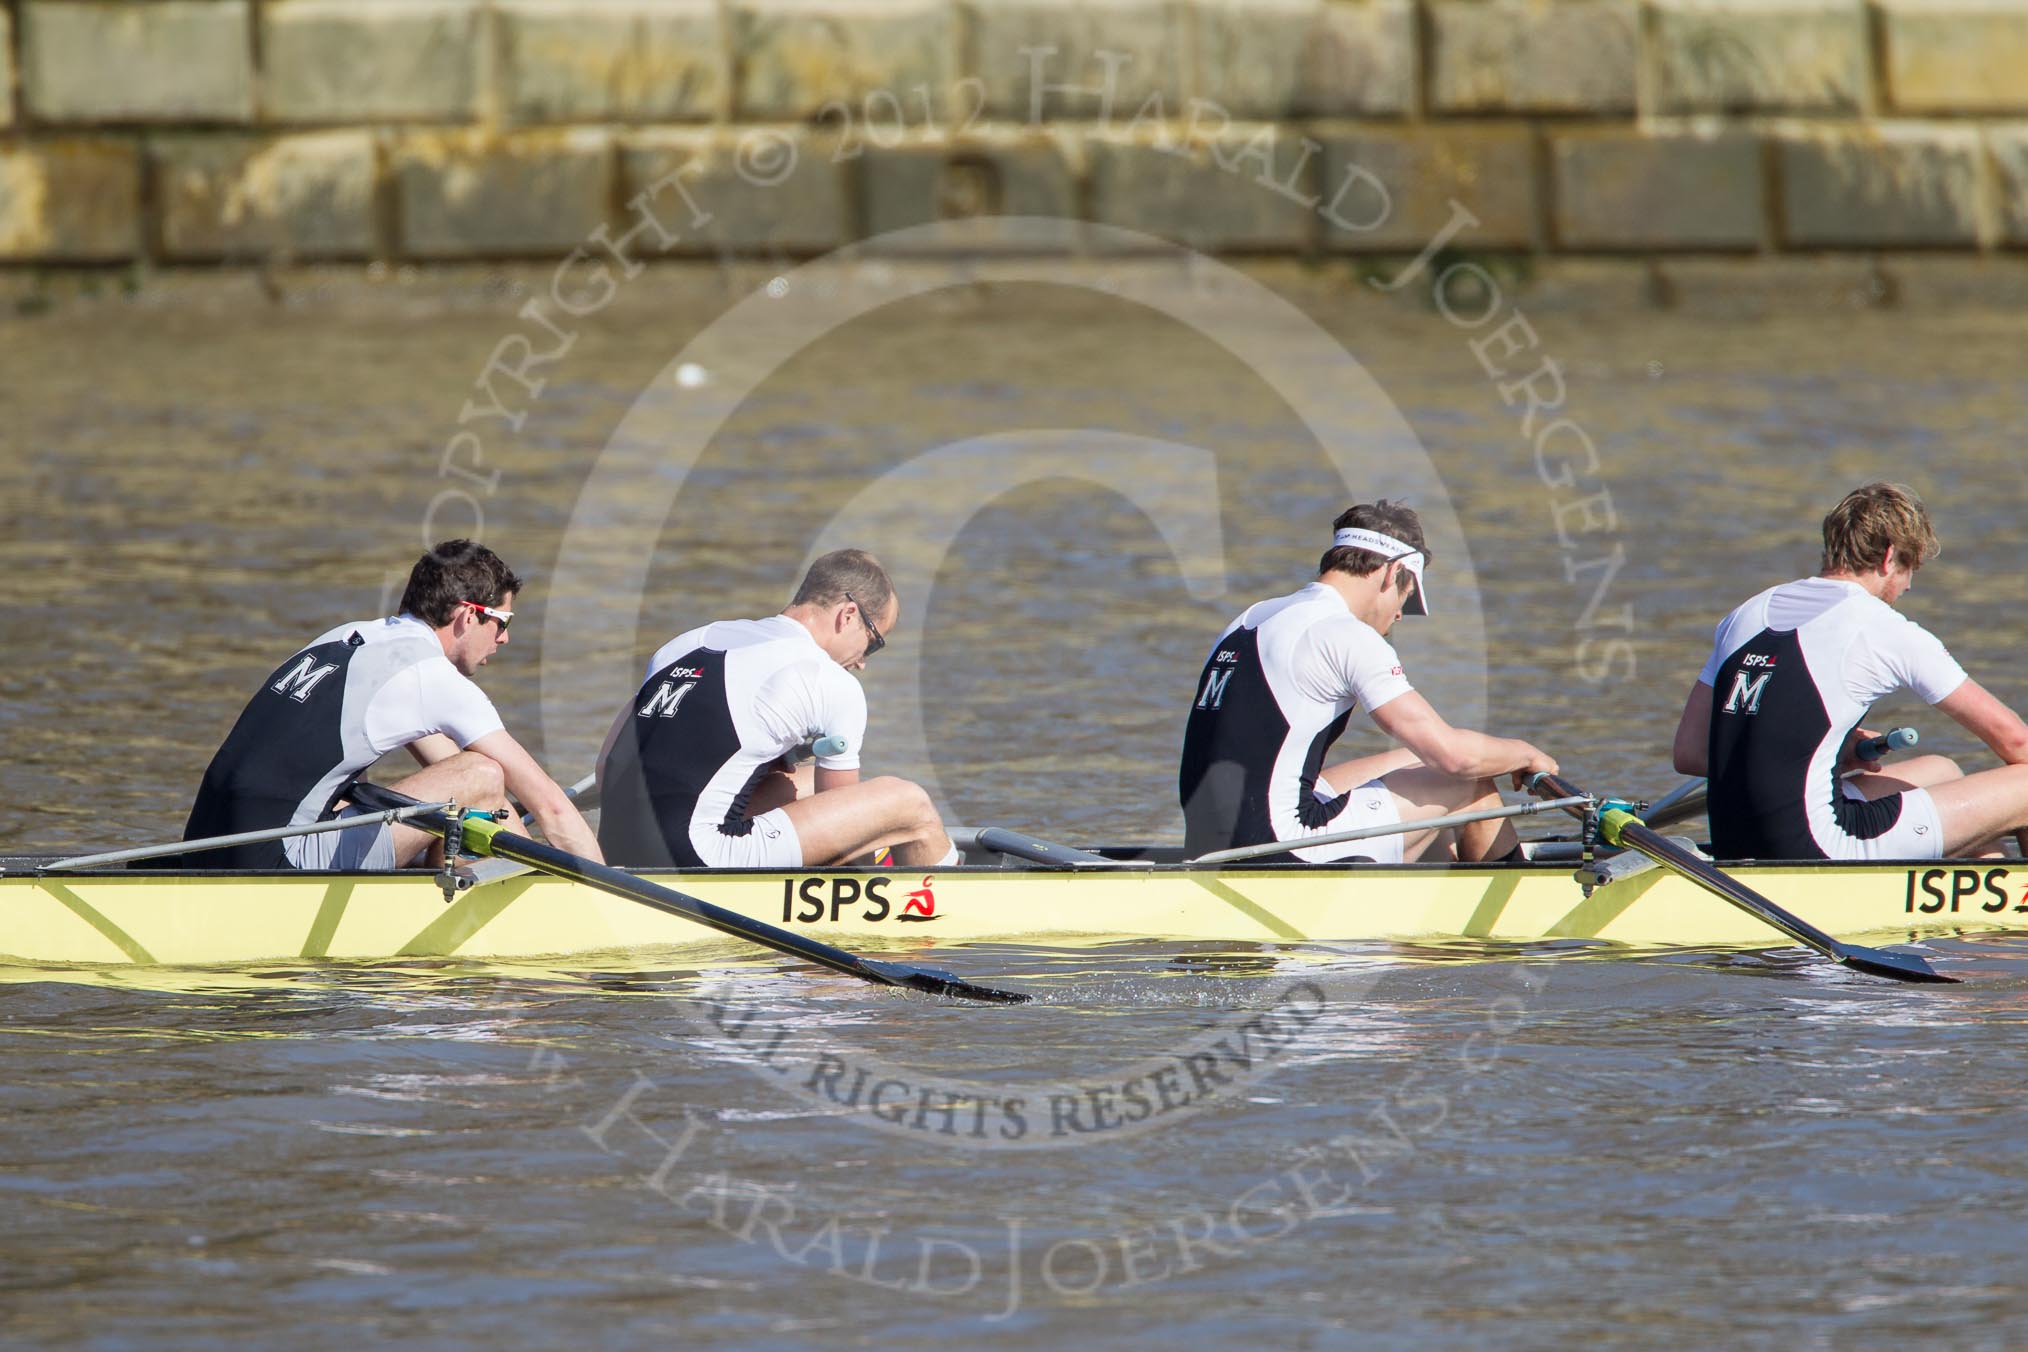 The Boat Race season 2012 - fixture CUBC vs Molesey BC.




on 25 March 2012 at 14:54, image #80